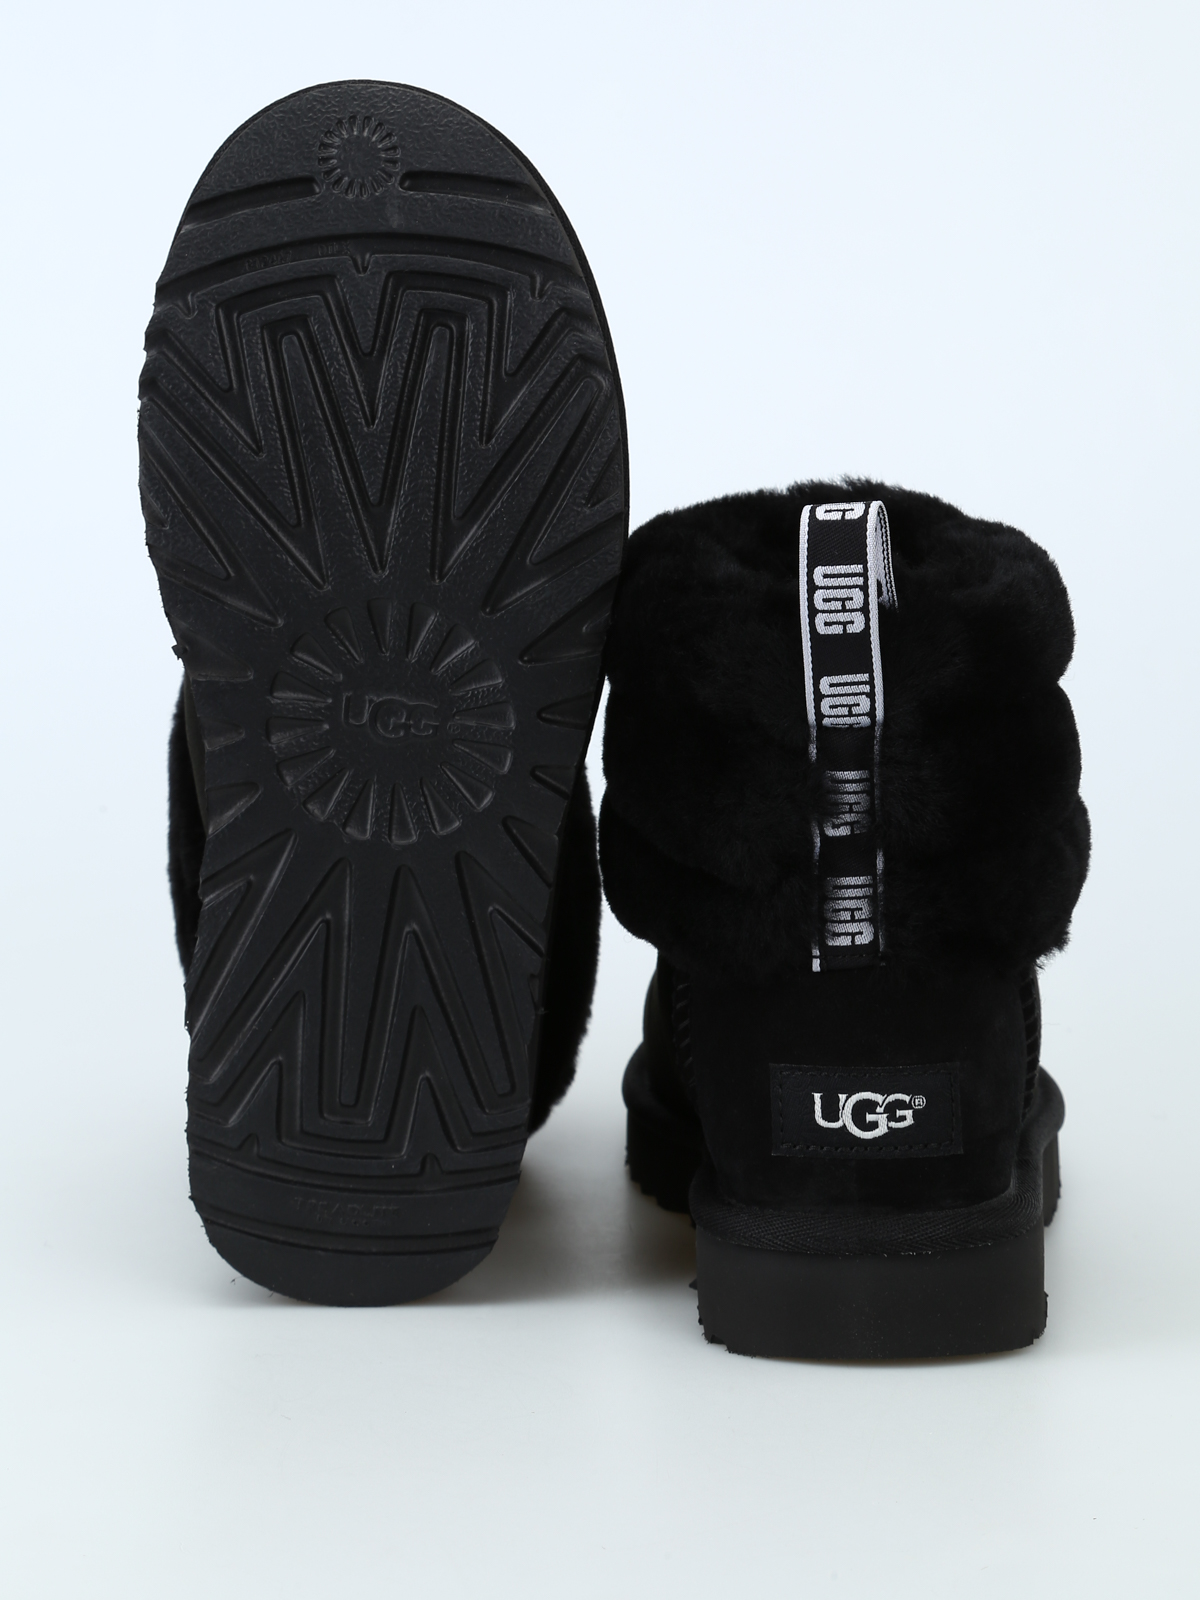 classic mini fluffy quilted ugg boot